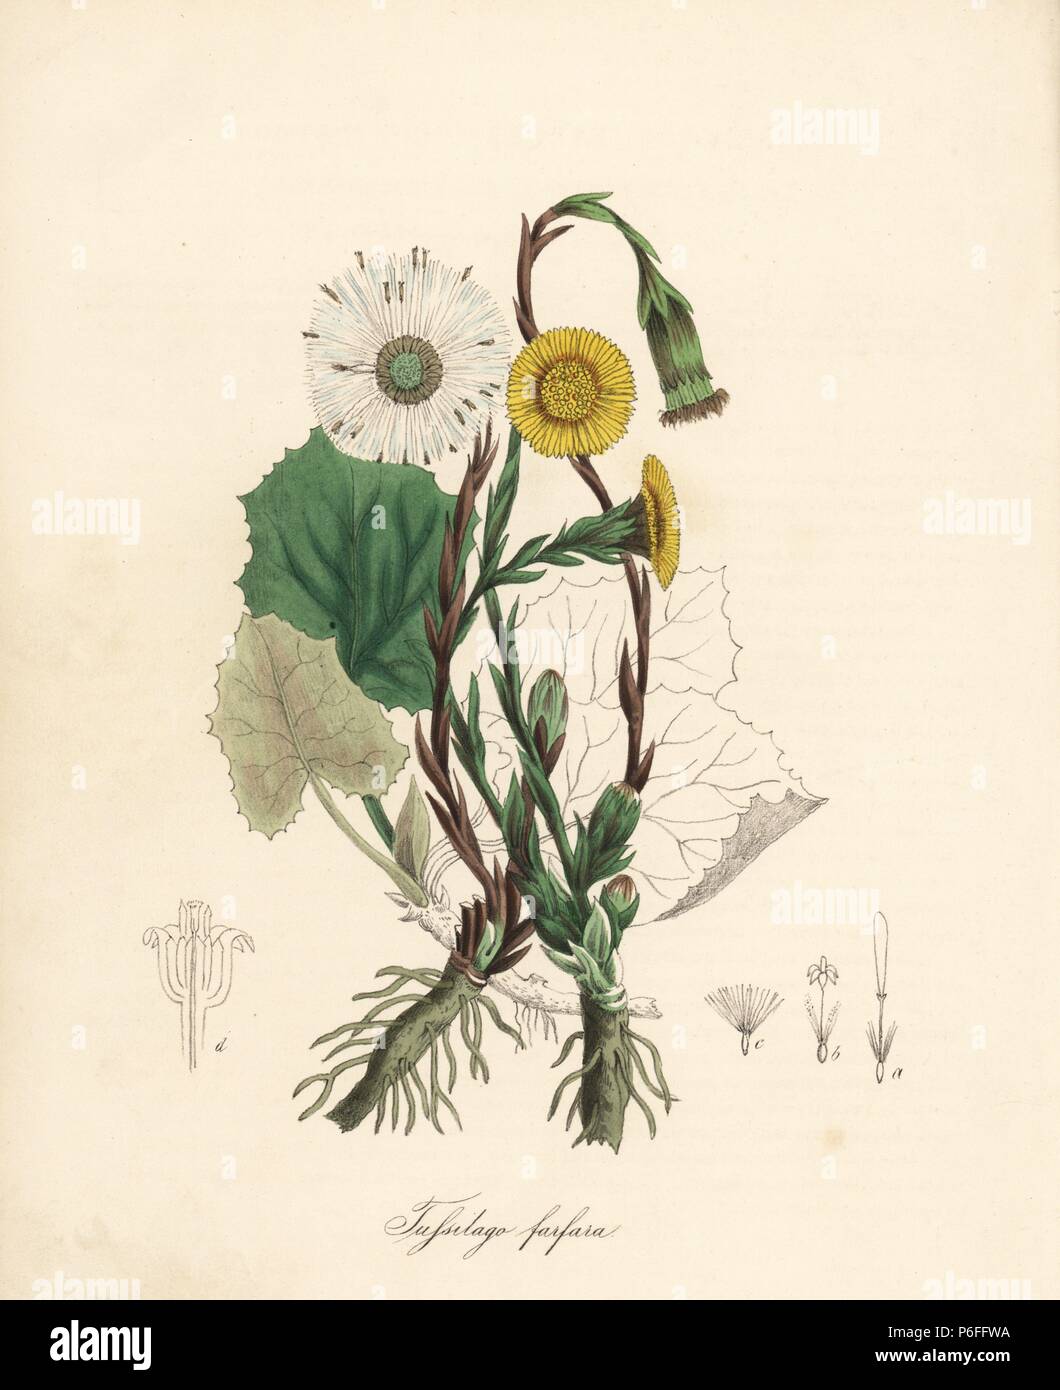 Colt's-foot, Tussilago farfara. Handcoloured zincograph by C. Chabot drawn by Miss M. A. Burnett from her 'Plantae Utiliores: or Illustrations of Useful Plants,' Whittaker, London, 1842. Miss Burnett drew the botanical illustrations, but the text was chiefly by her late brother, British botanist Gilbert Thomas Burnett (1800-1835). Stock Photo